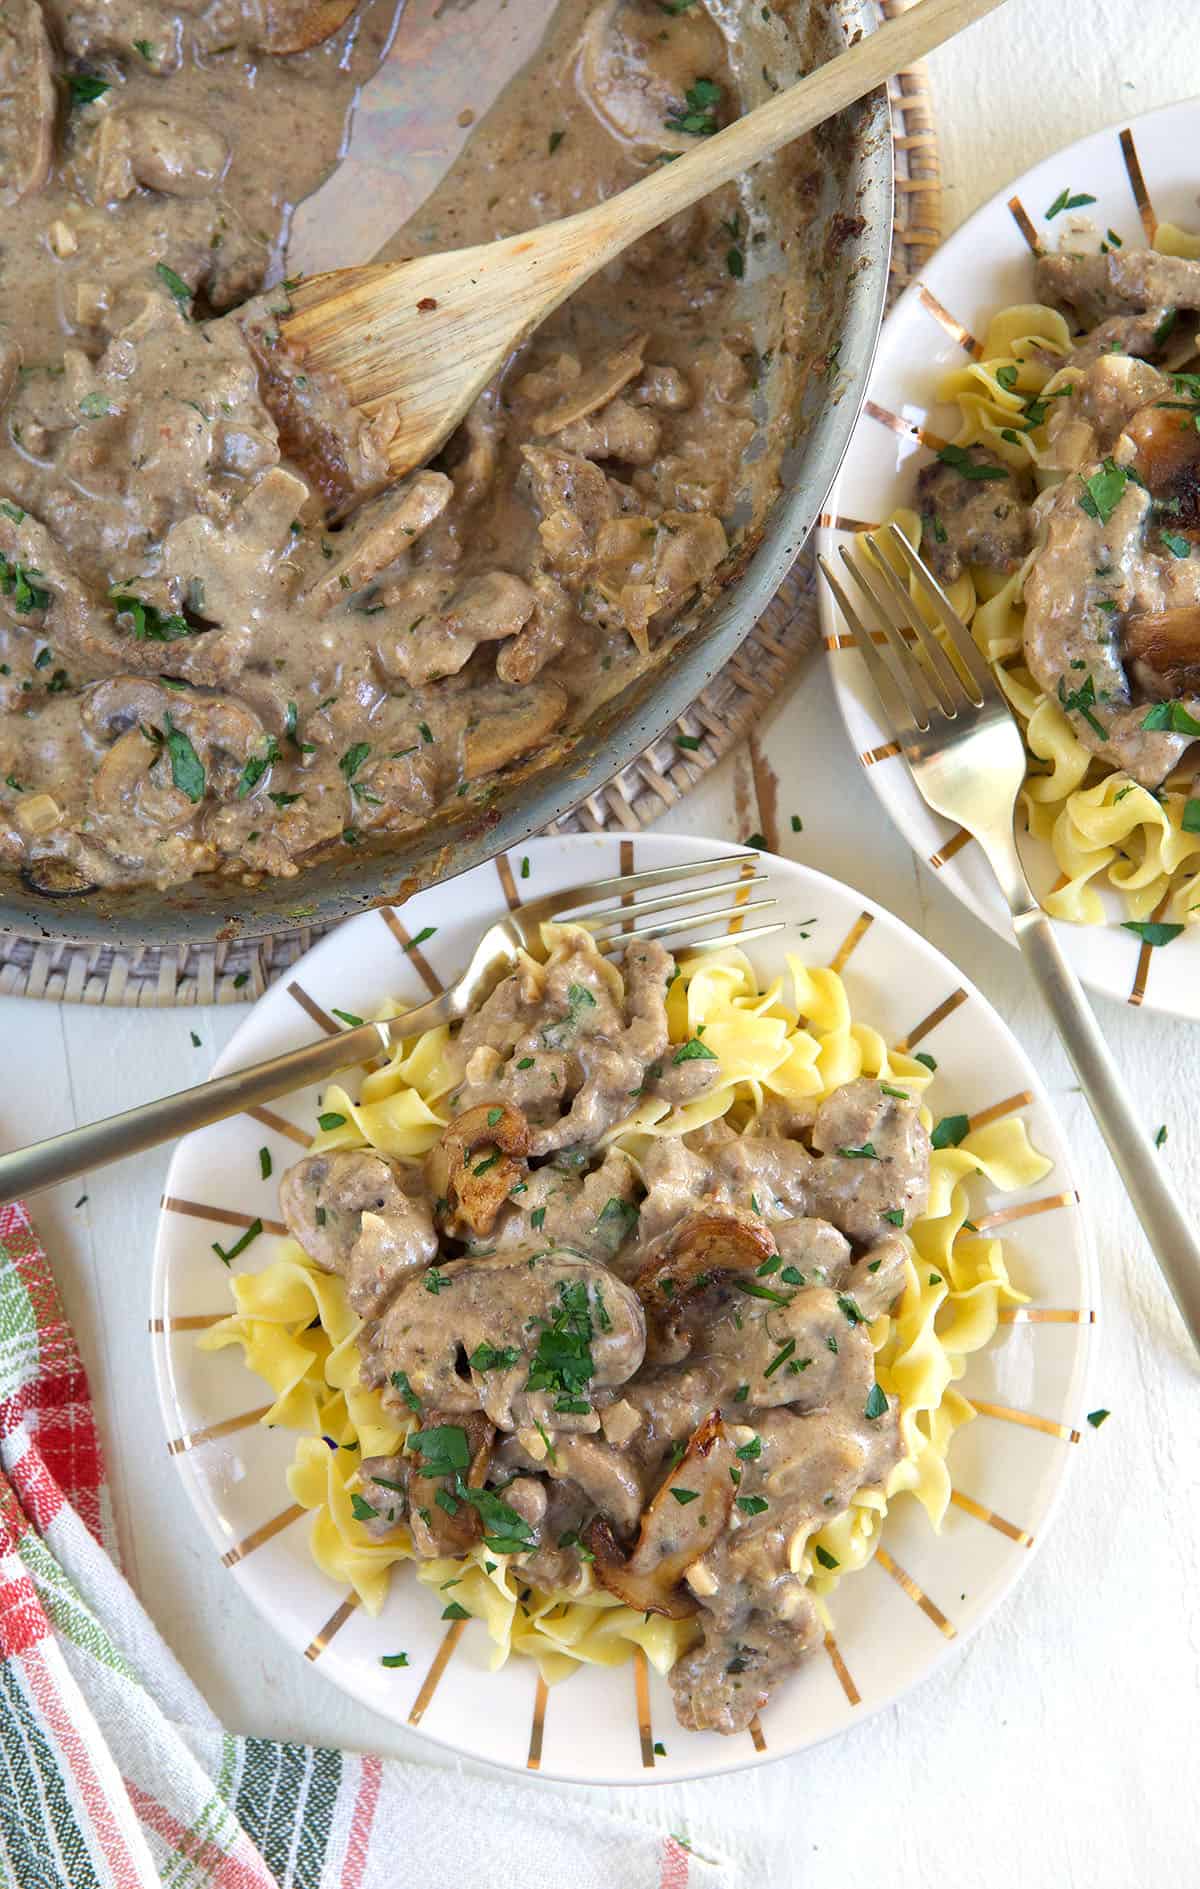 A plate of egg noodles is topped with beef stroganoff and placed next to a full skillet.